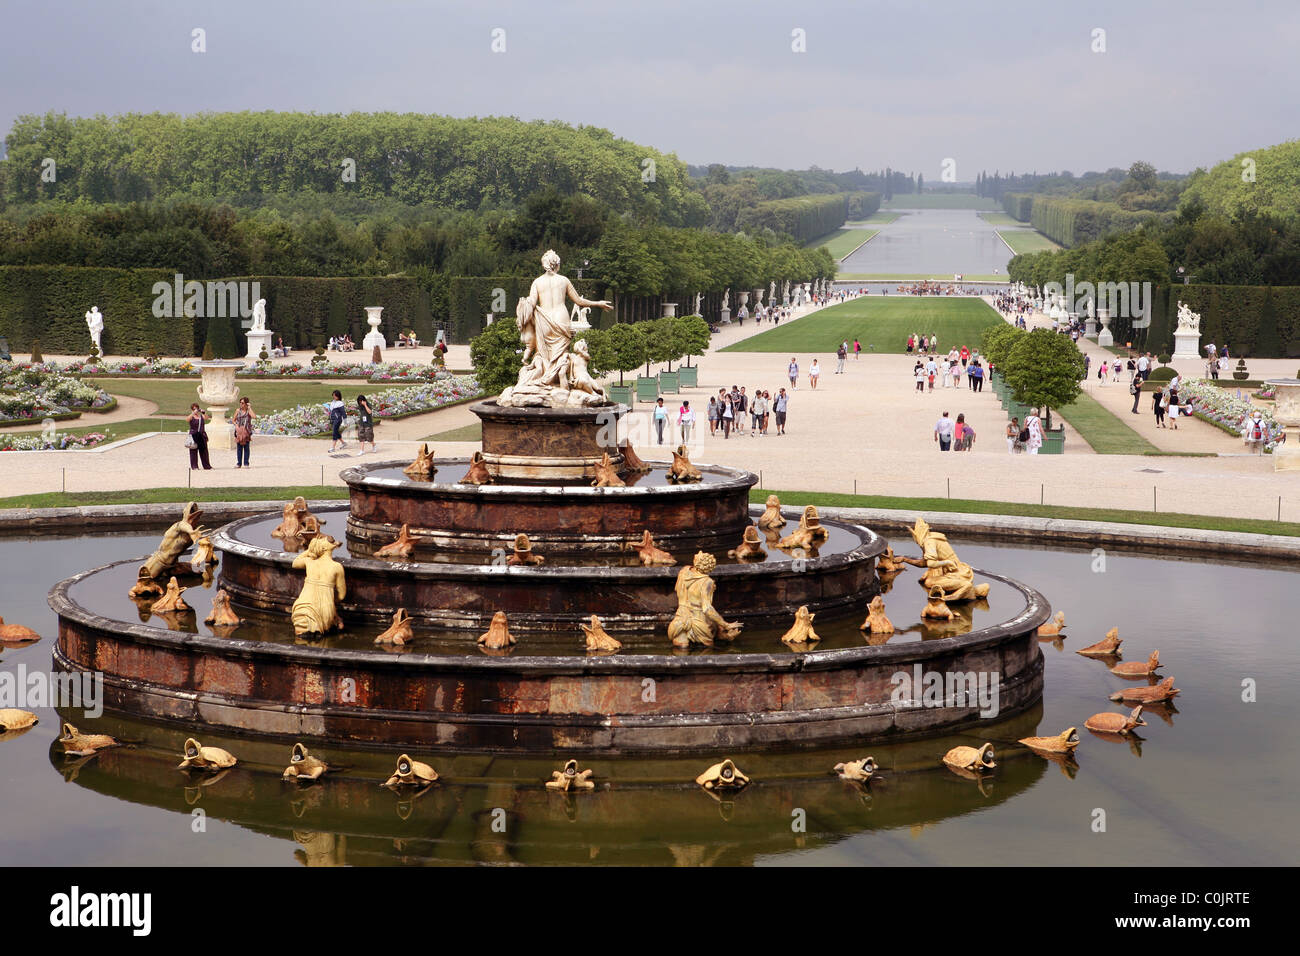 Scenes from the gardens of the Palace of Versailles France Stock Photo